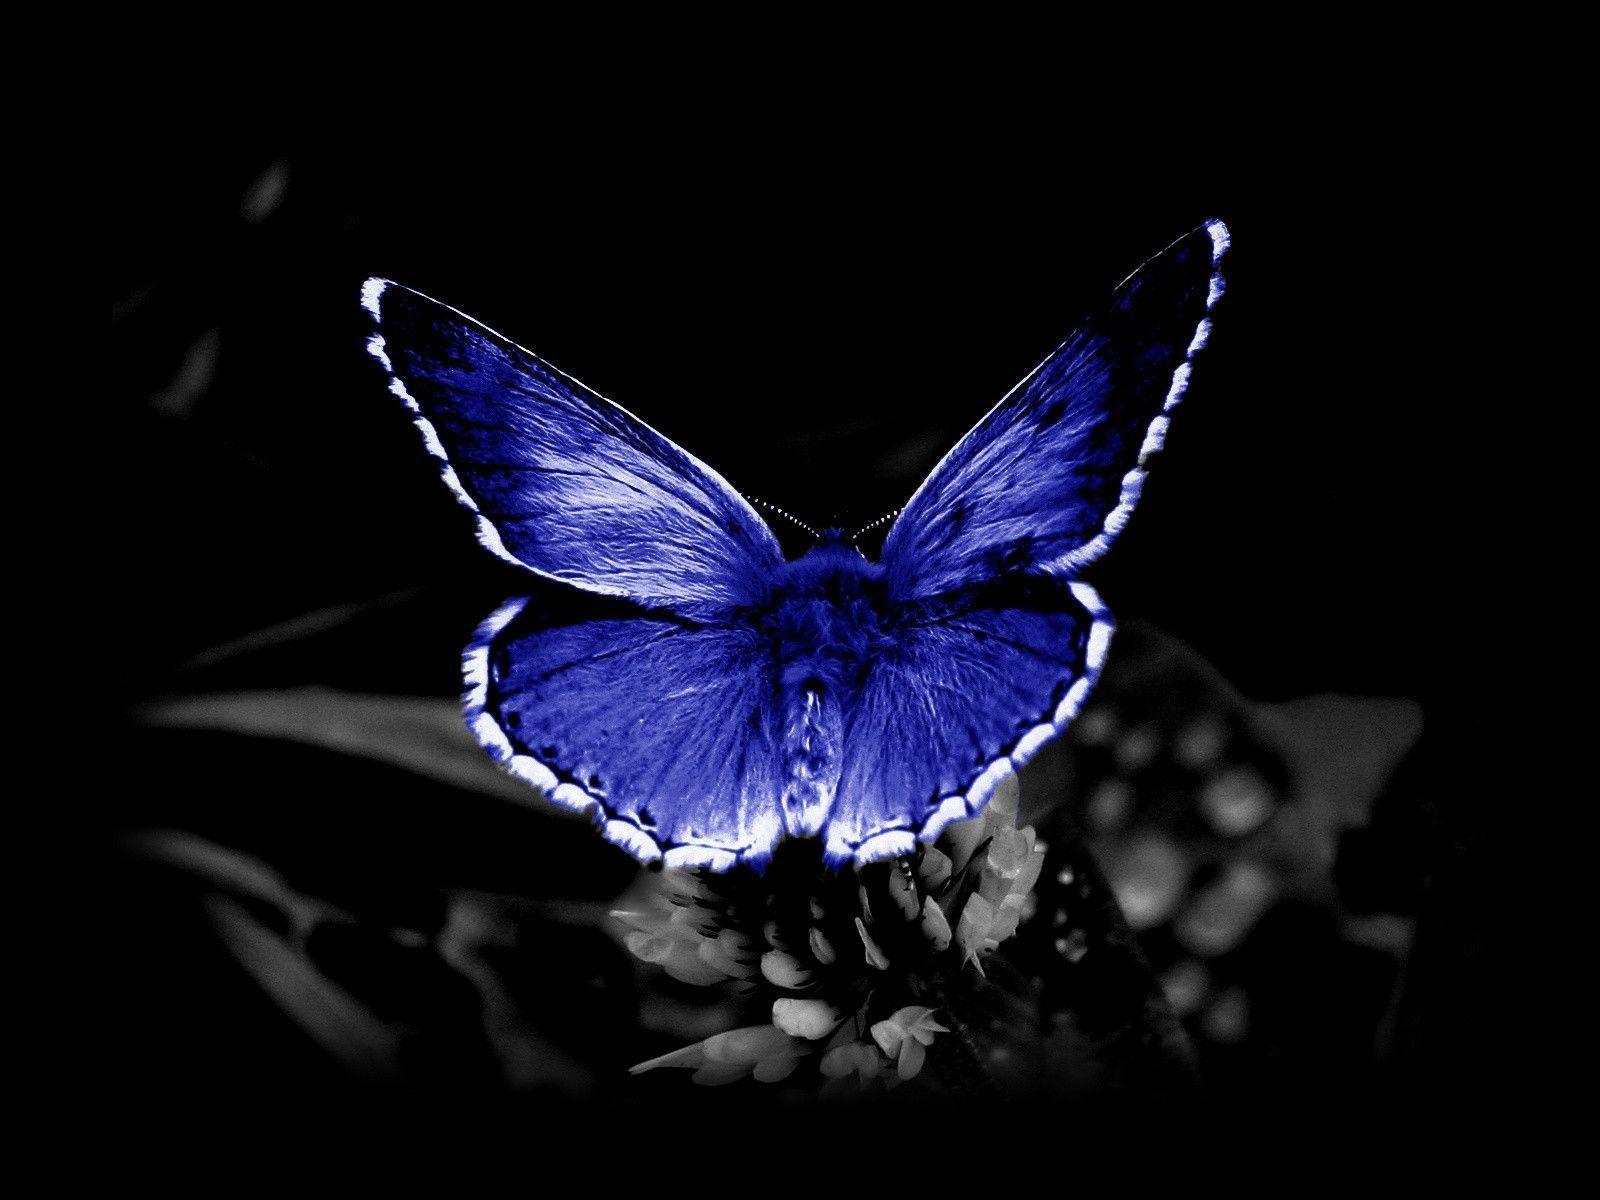 10300 Butterfly Lighting Stock Photos Pictures  RoyaltyFree Images   iStock